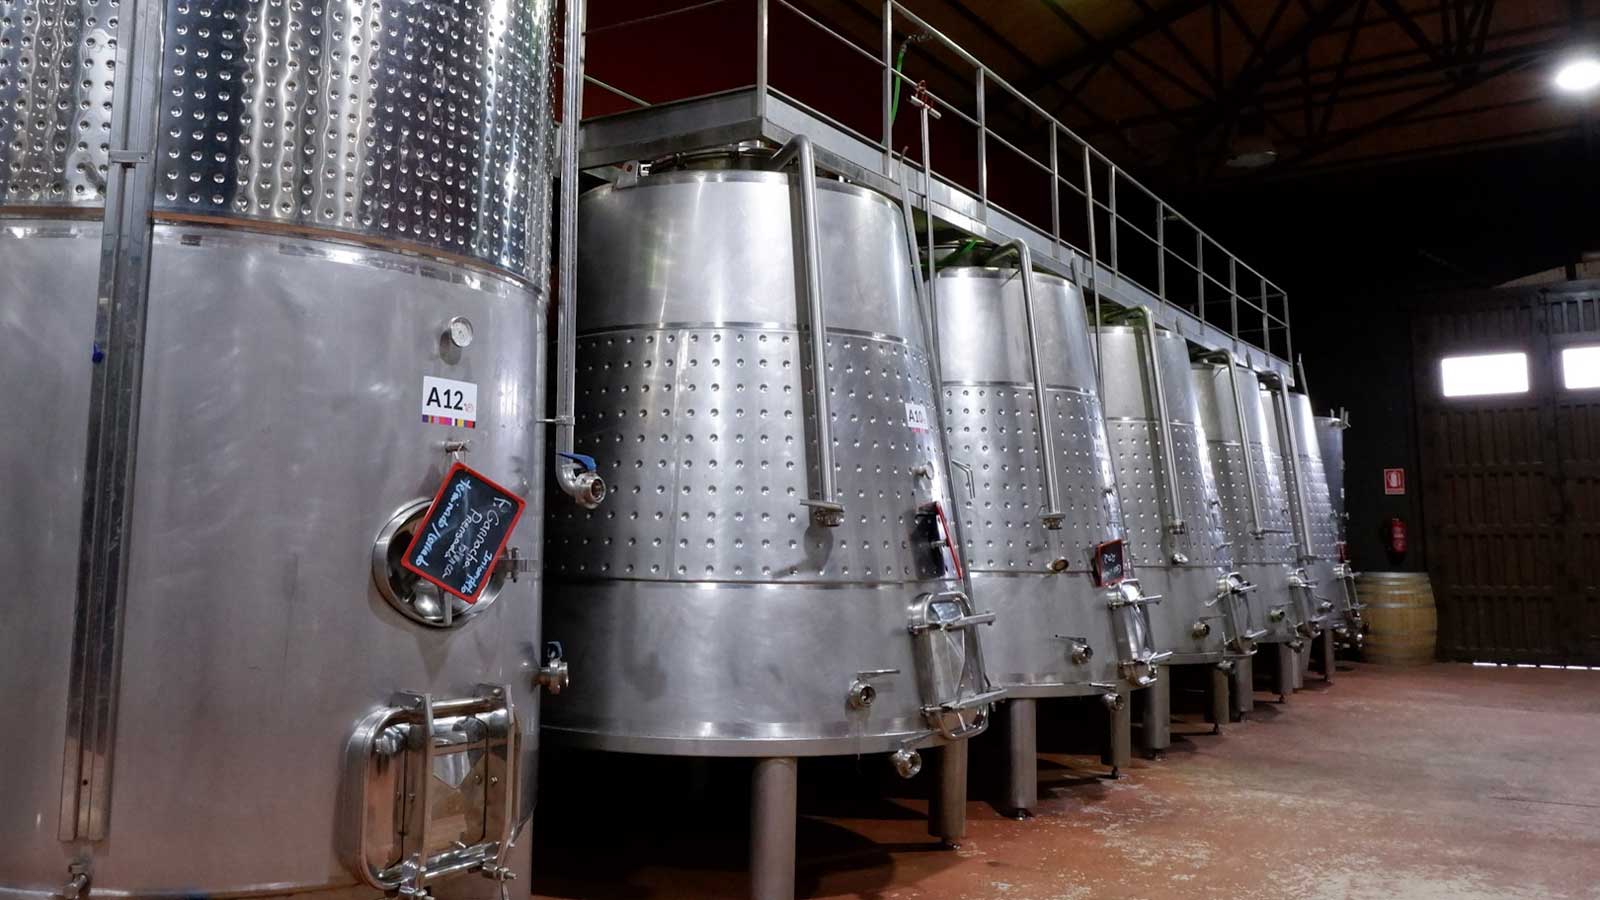 Stainless steel fermenting tanks in a winery